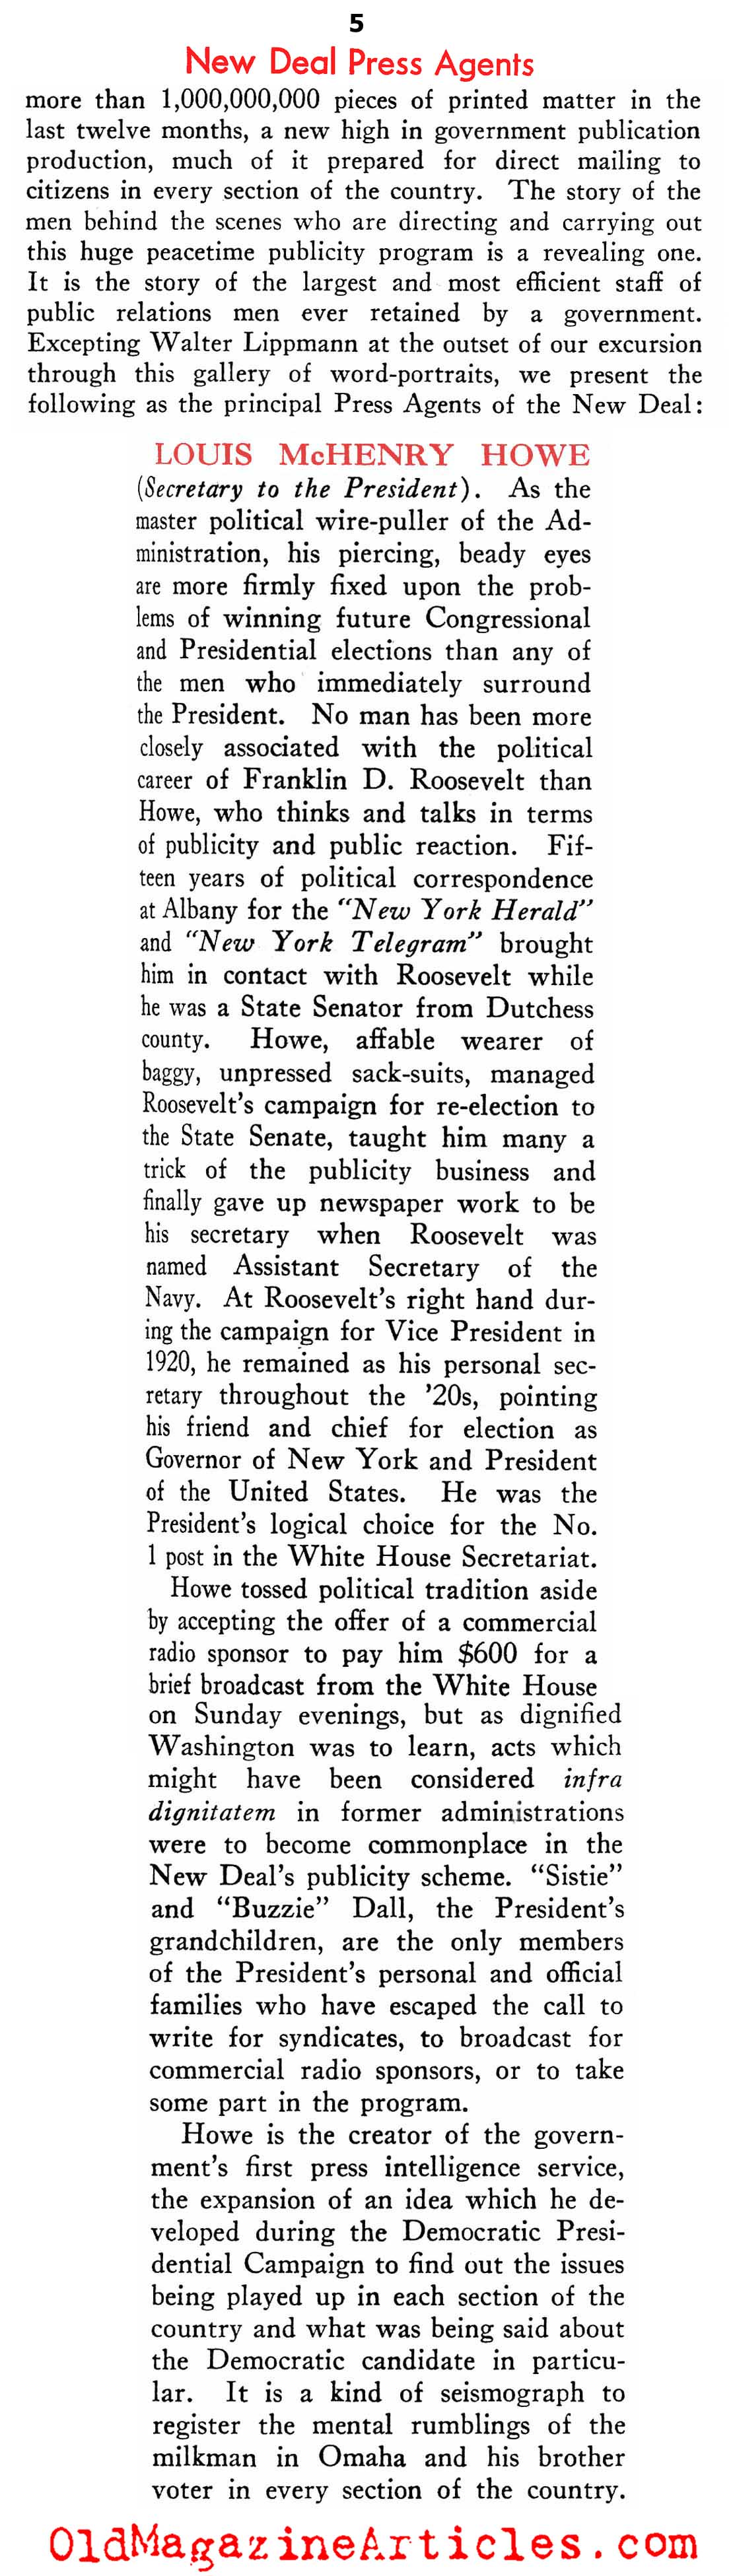 FDR's Publicity Machine (New Outlook Magazine, 1934)